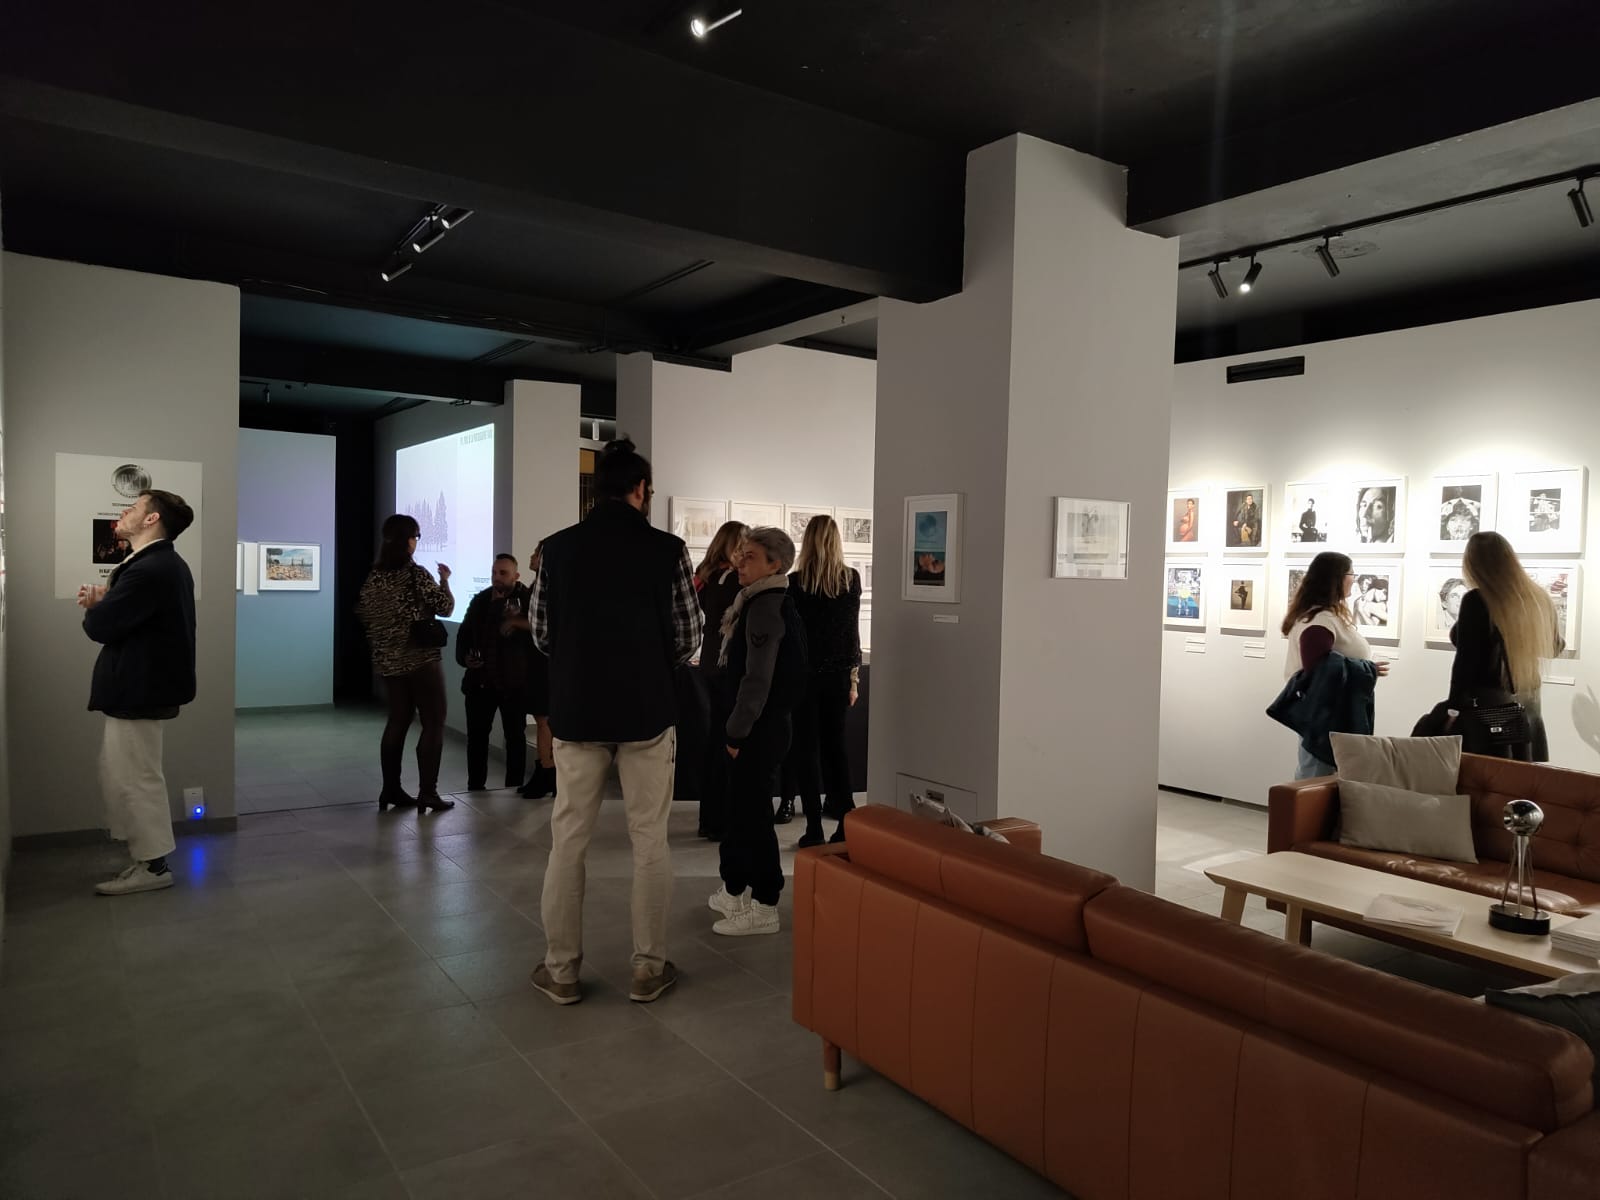 px3-and-ipa-winners-exhibition-in-athens-1